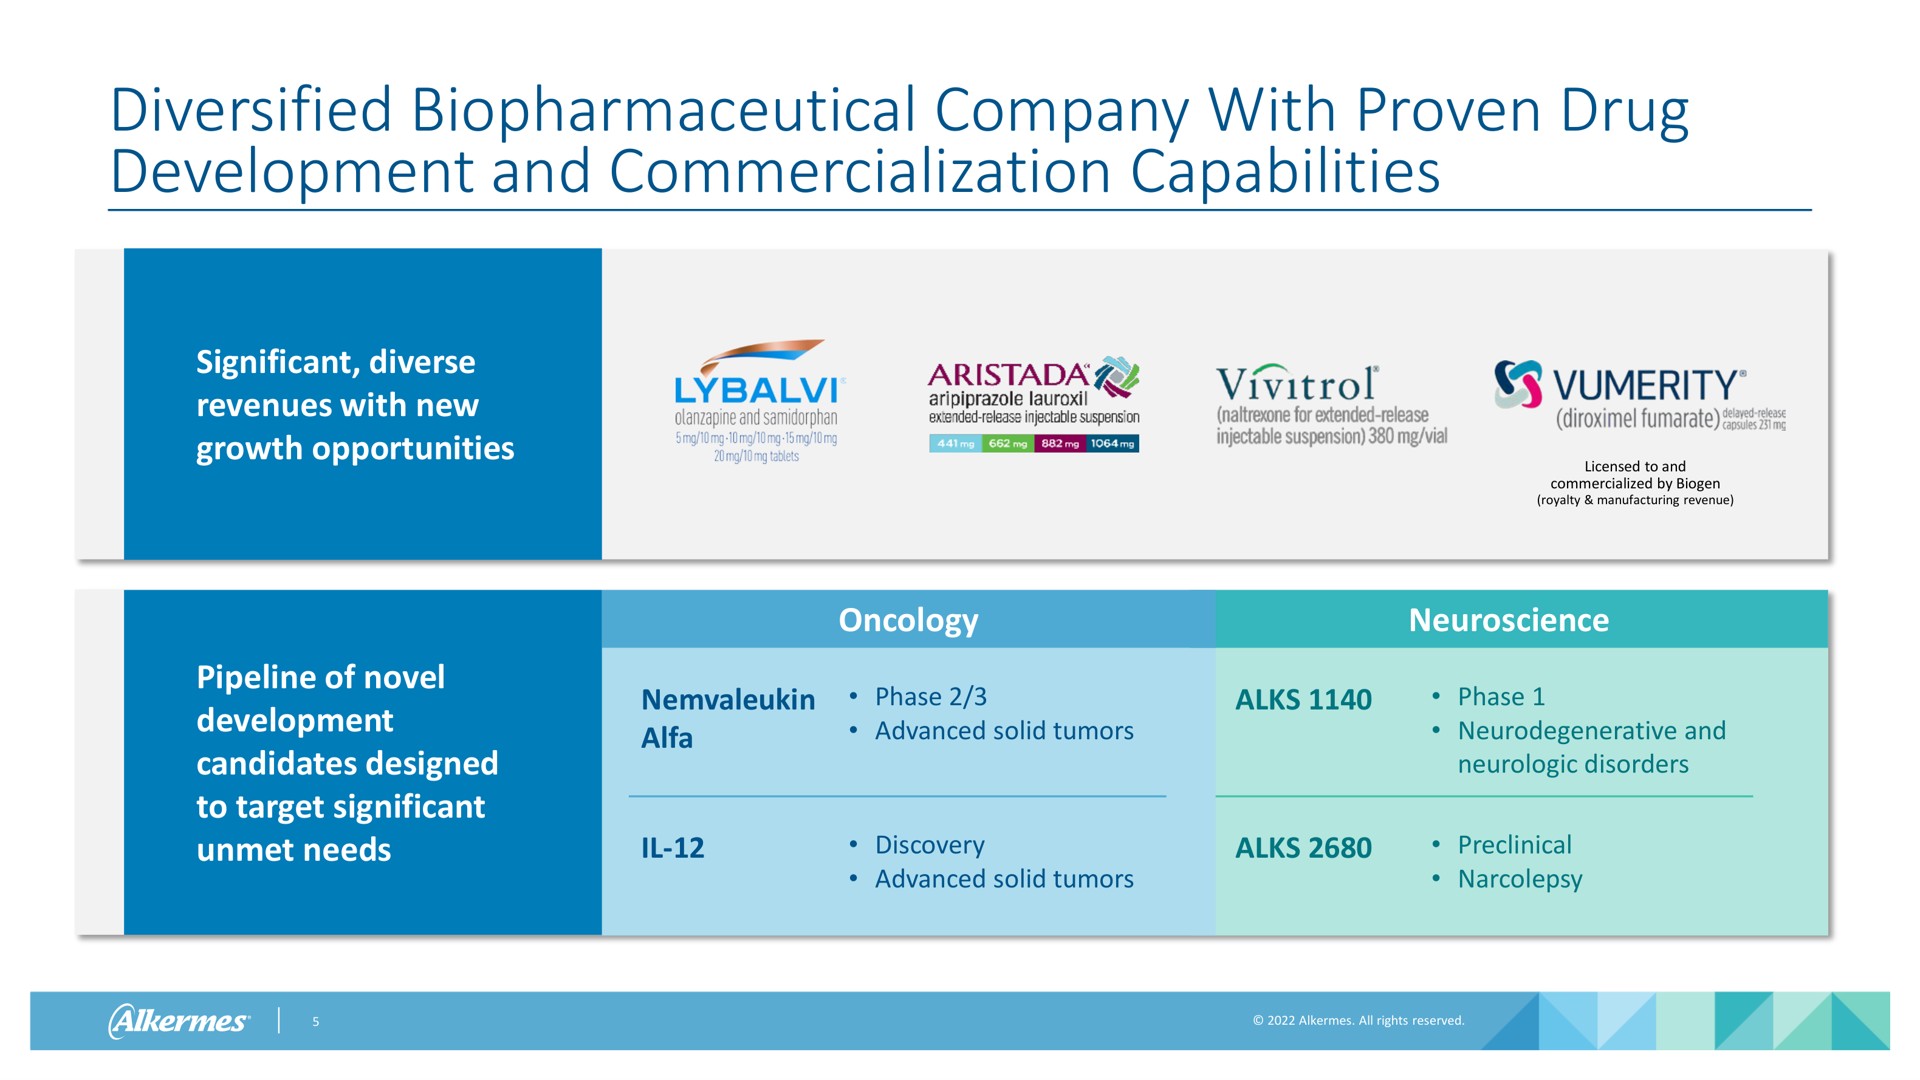 diversified company with proven drug development and commercialization capabilities | Alkermes